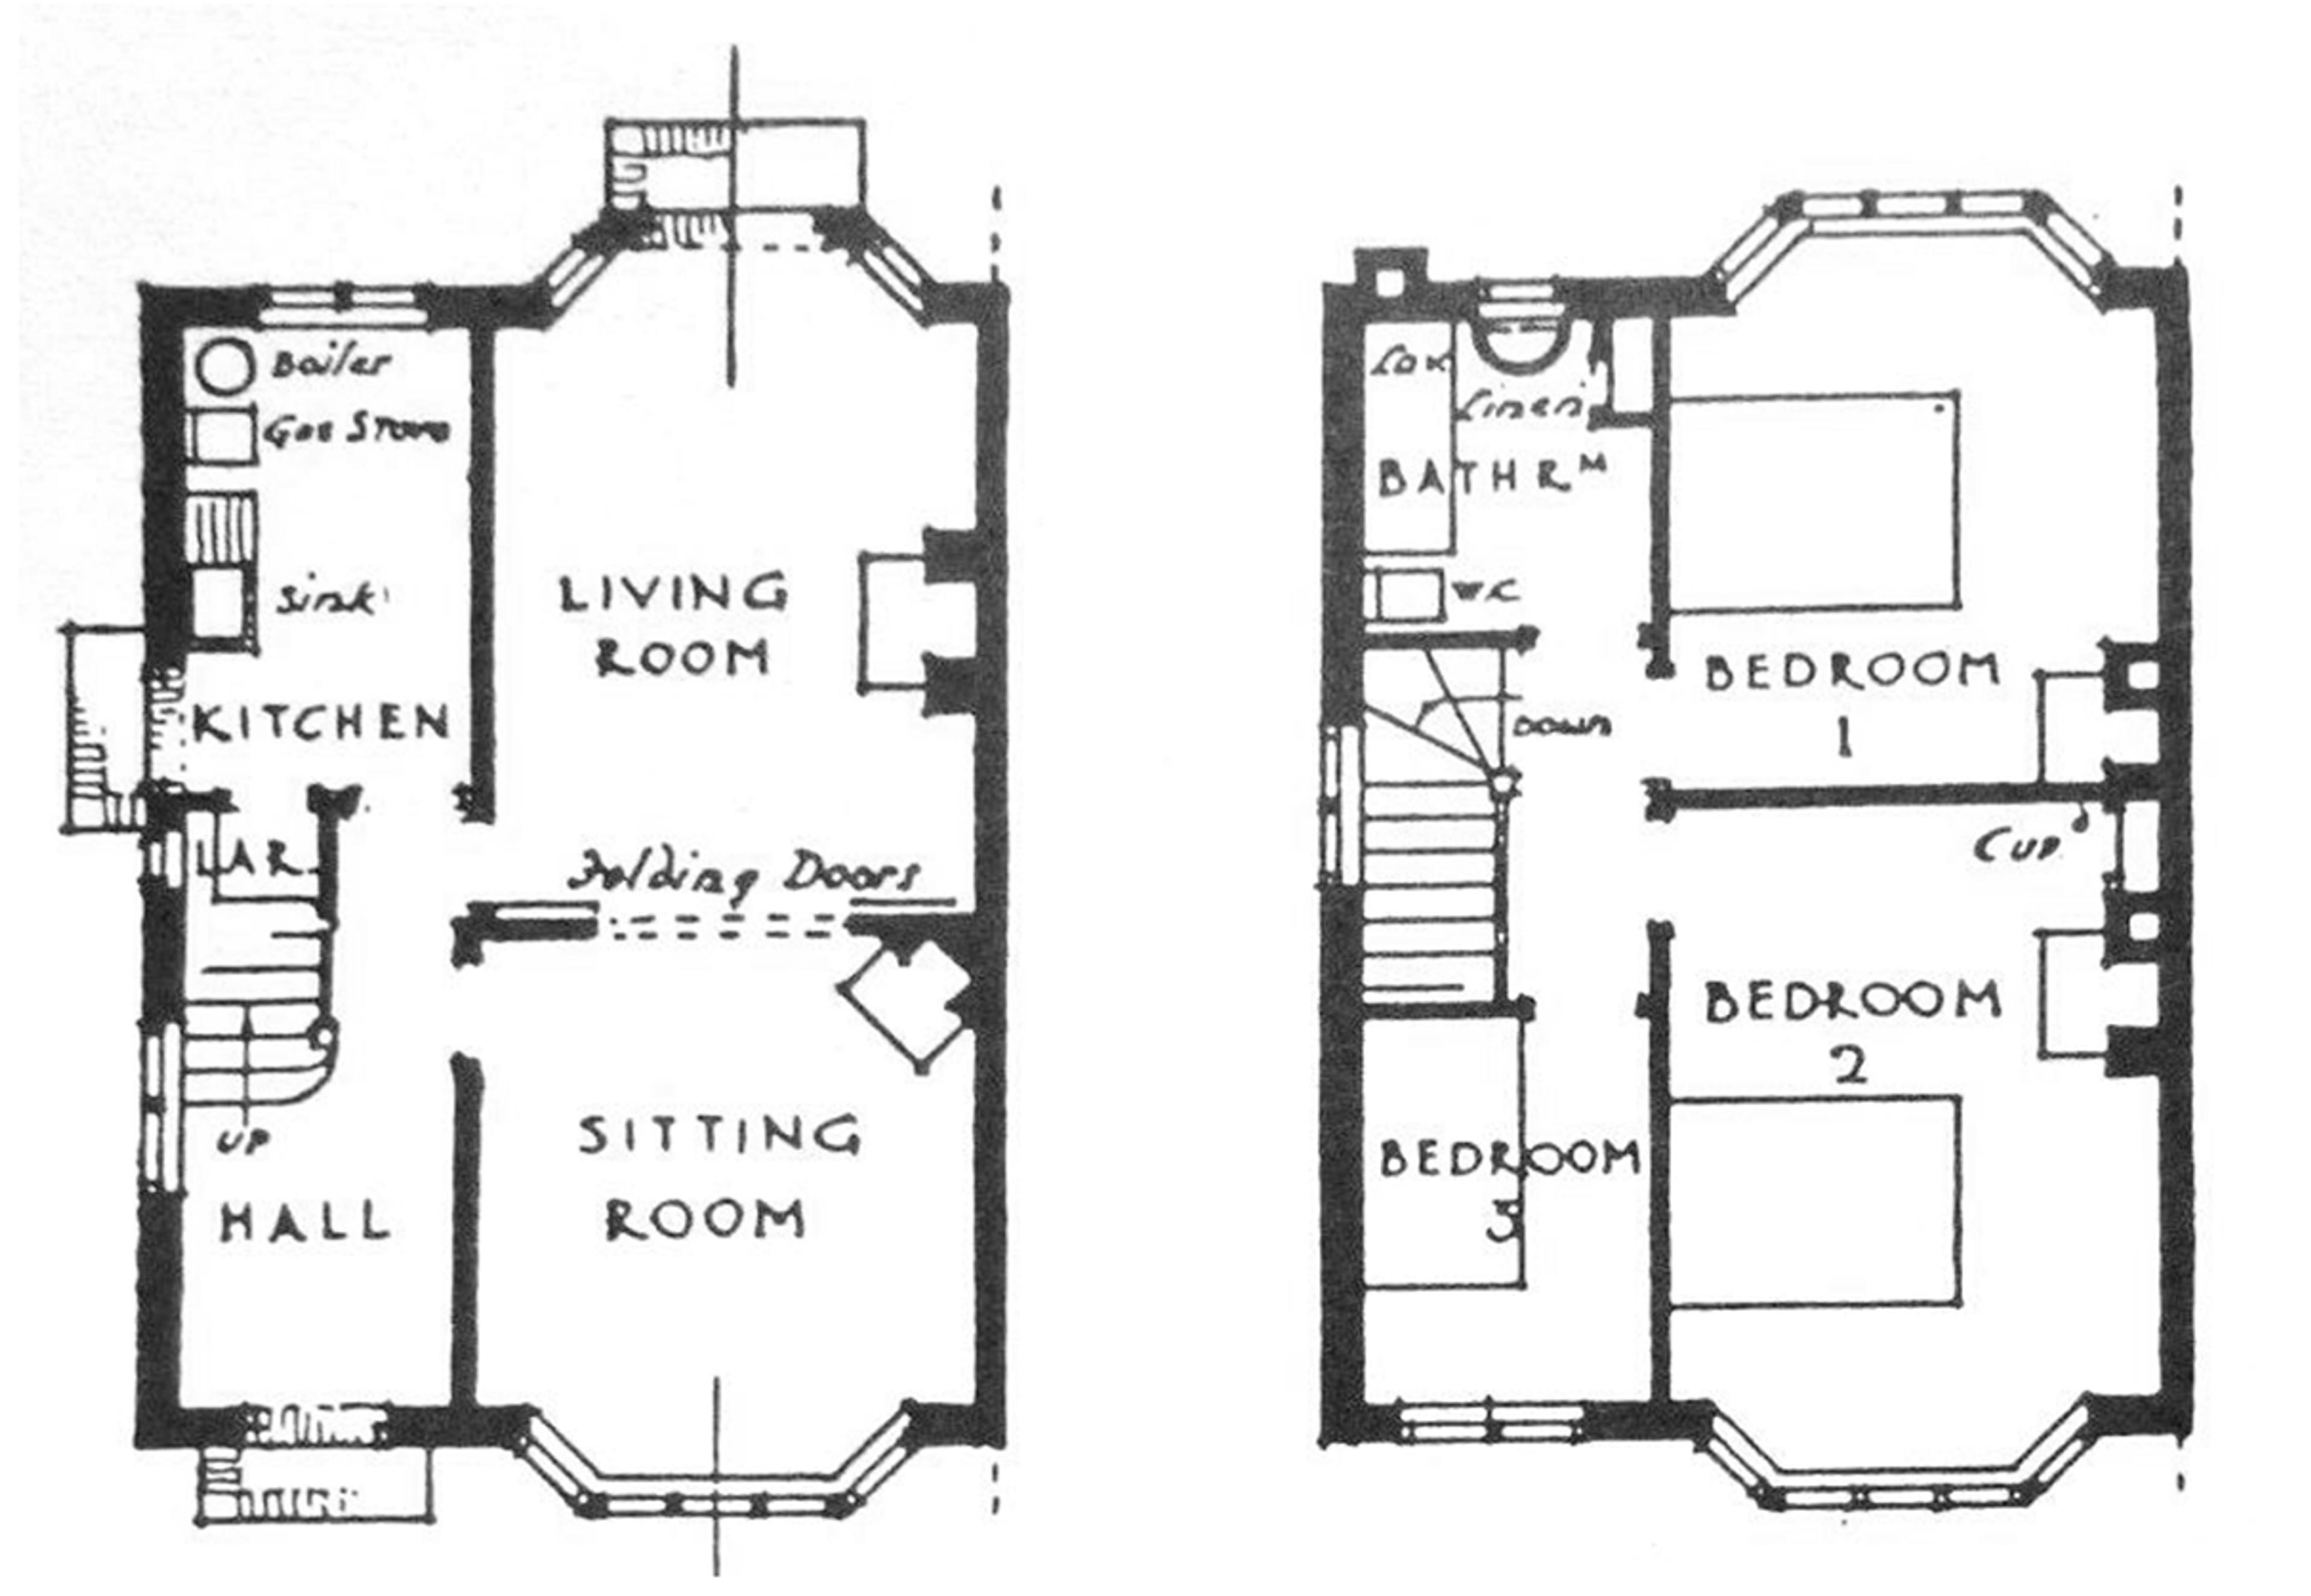 Pattern plans of a typical 1930s house